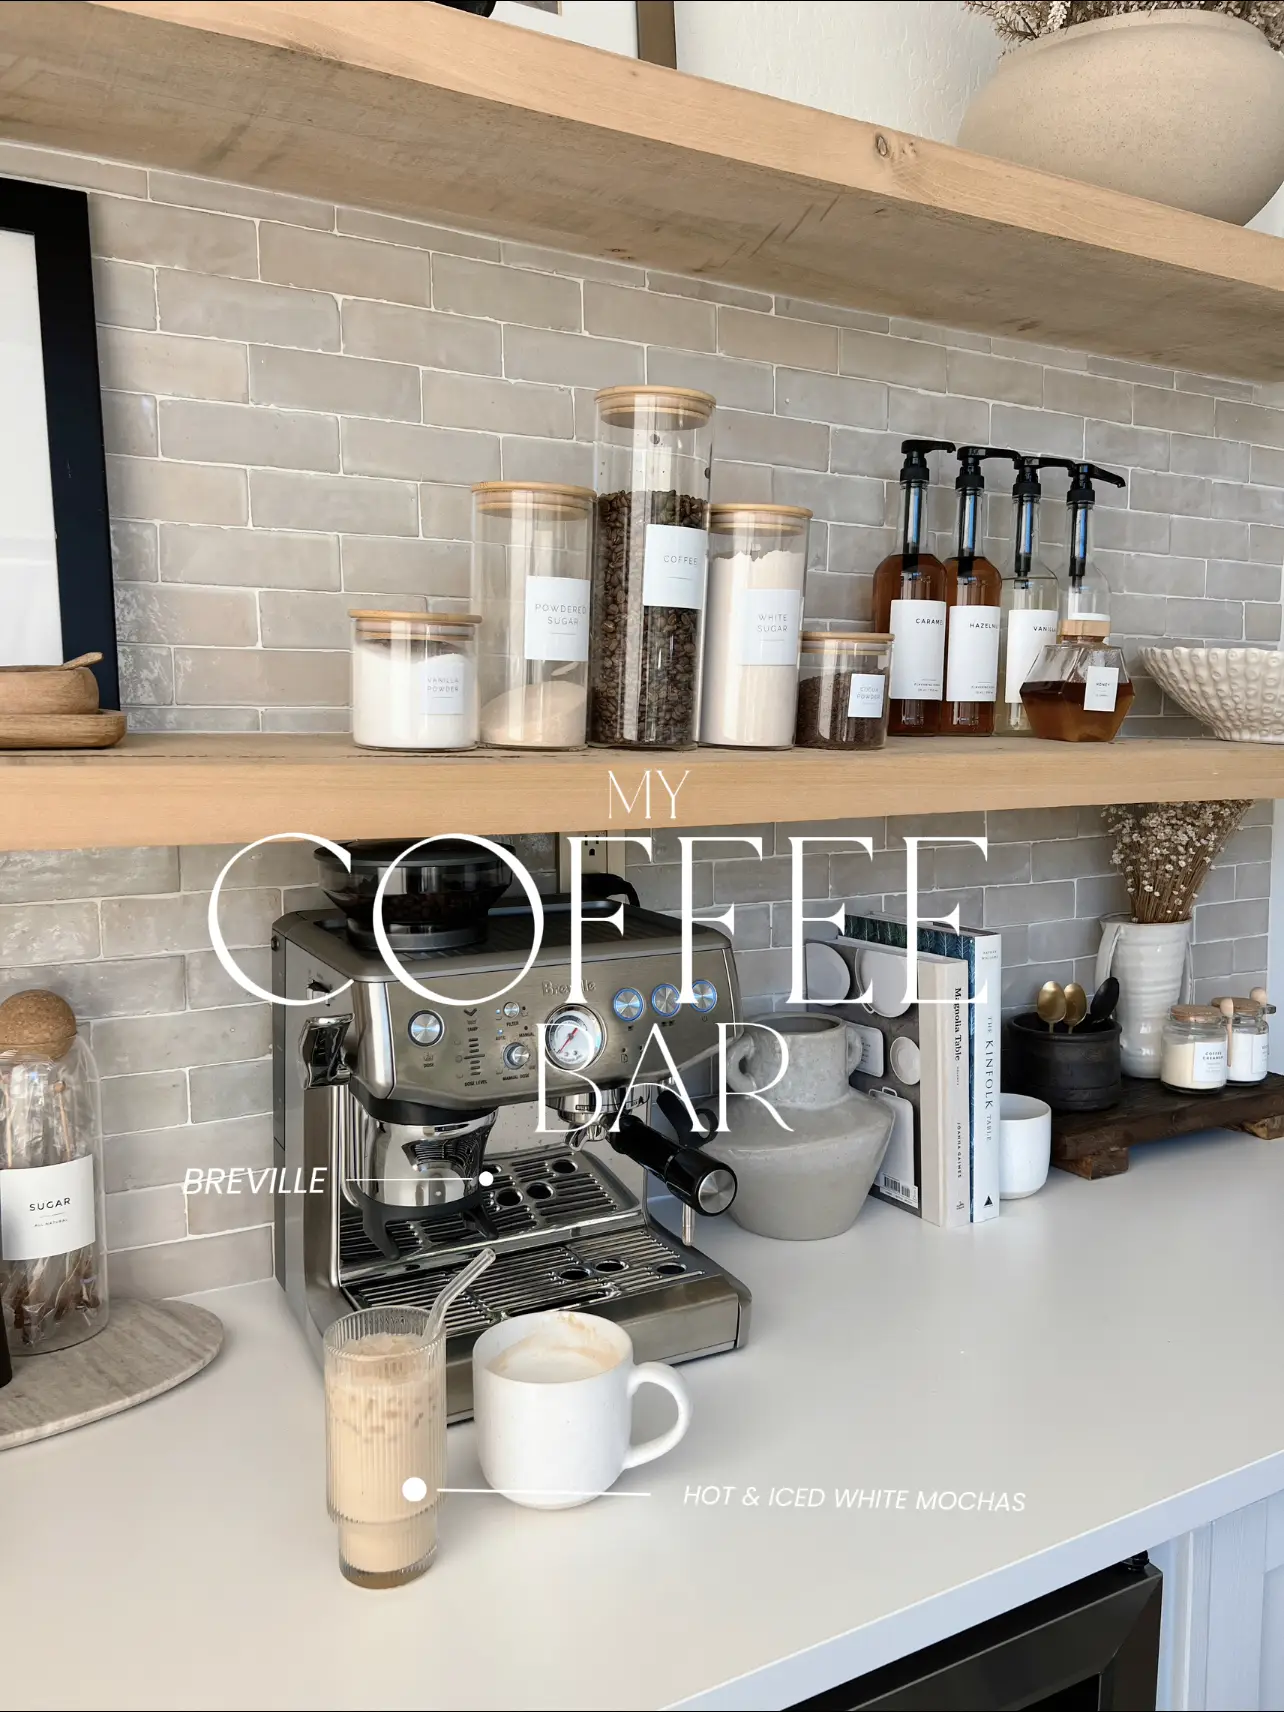 How to Specify a Coffee Center in Your Kitchen Designs – VESTABUL SCHOOL OF  DESIGN